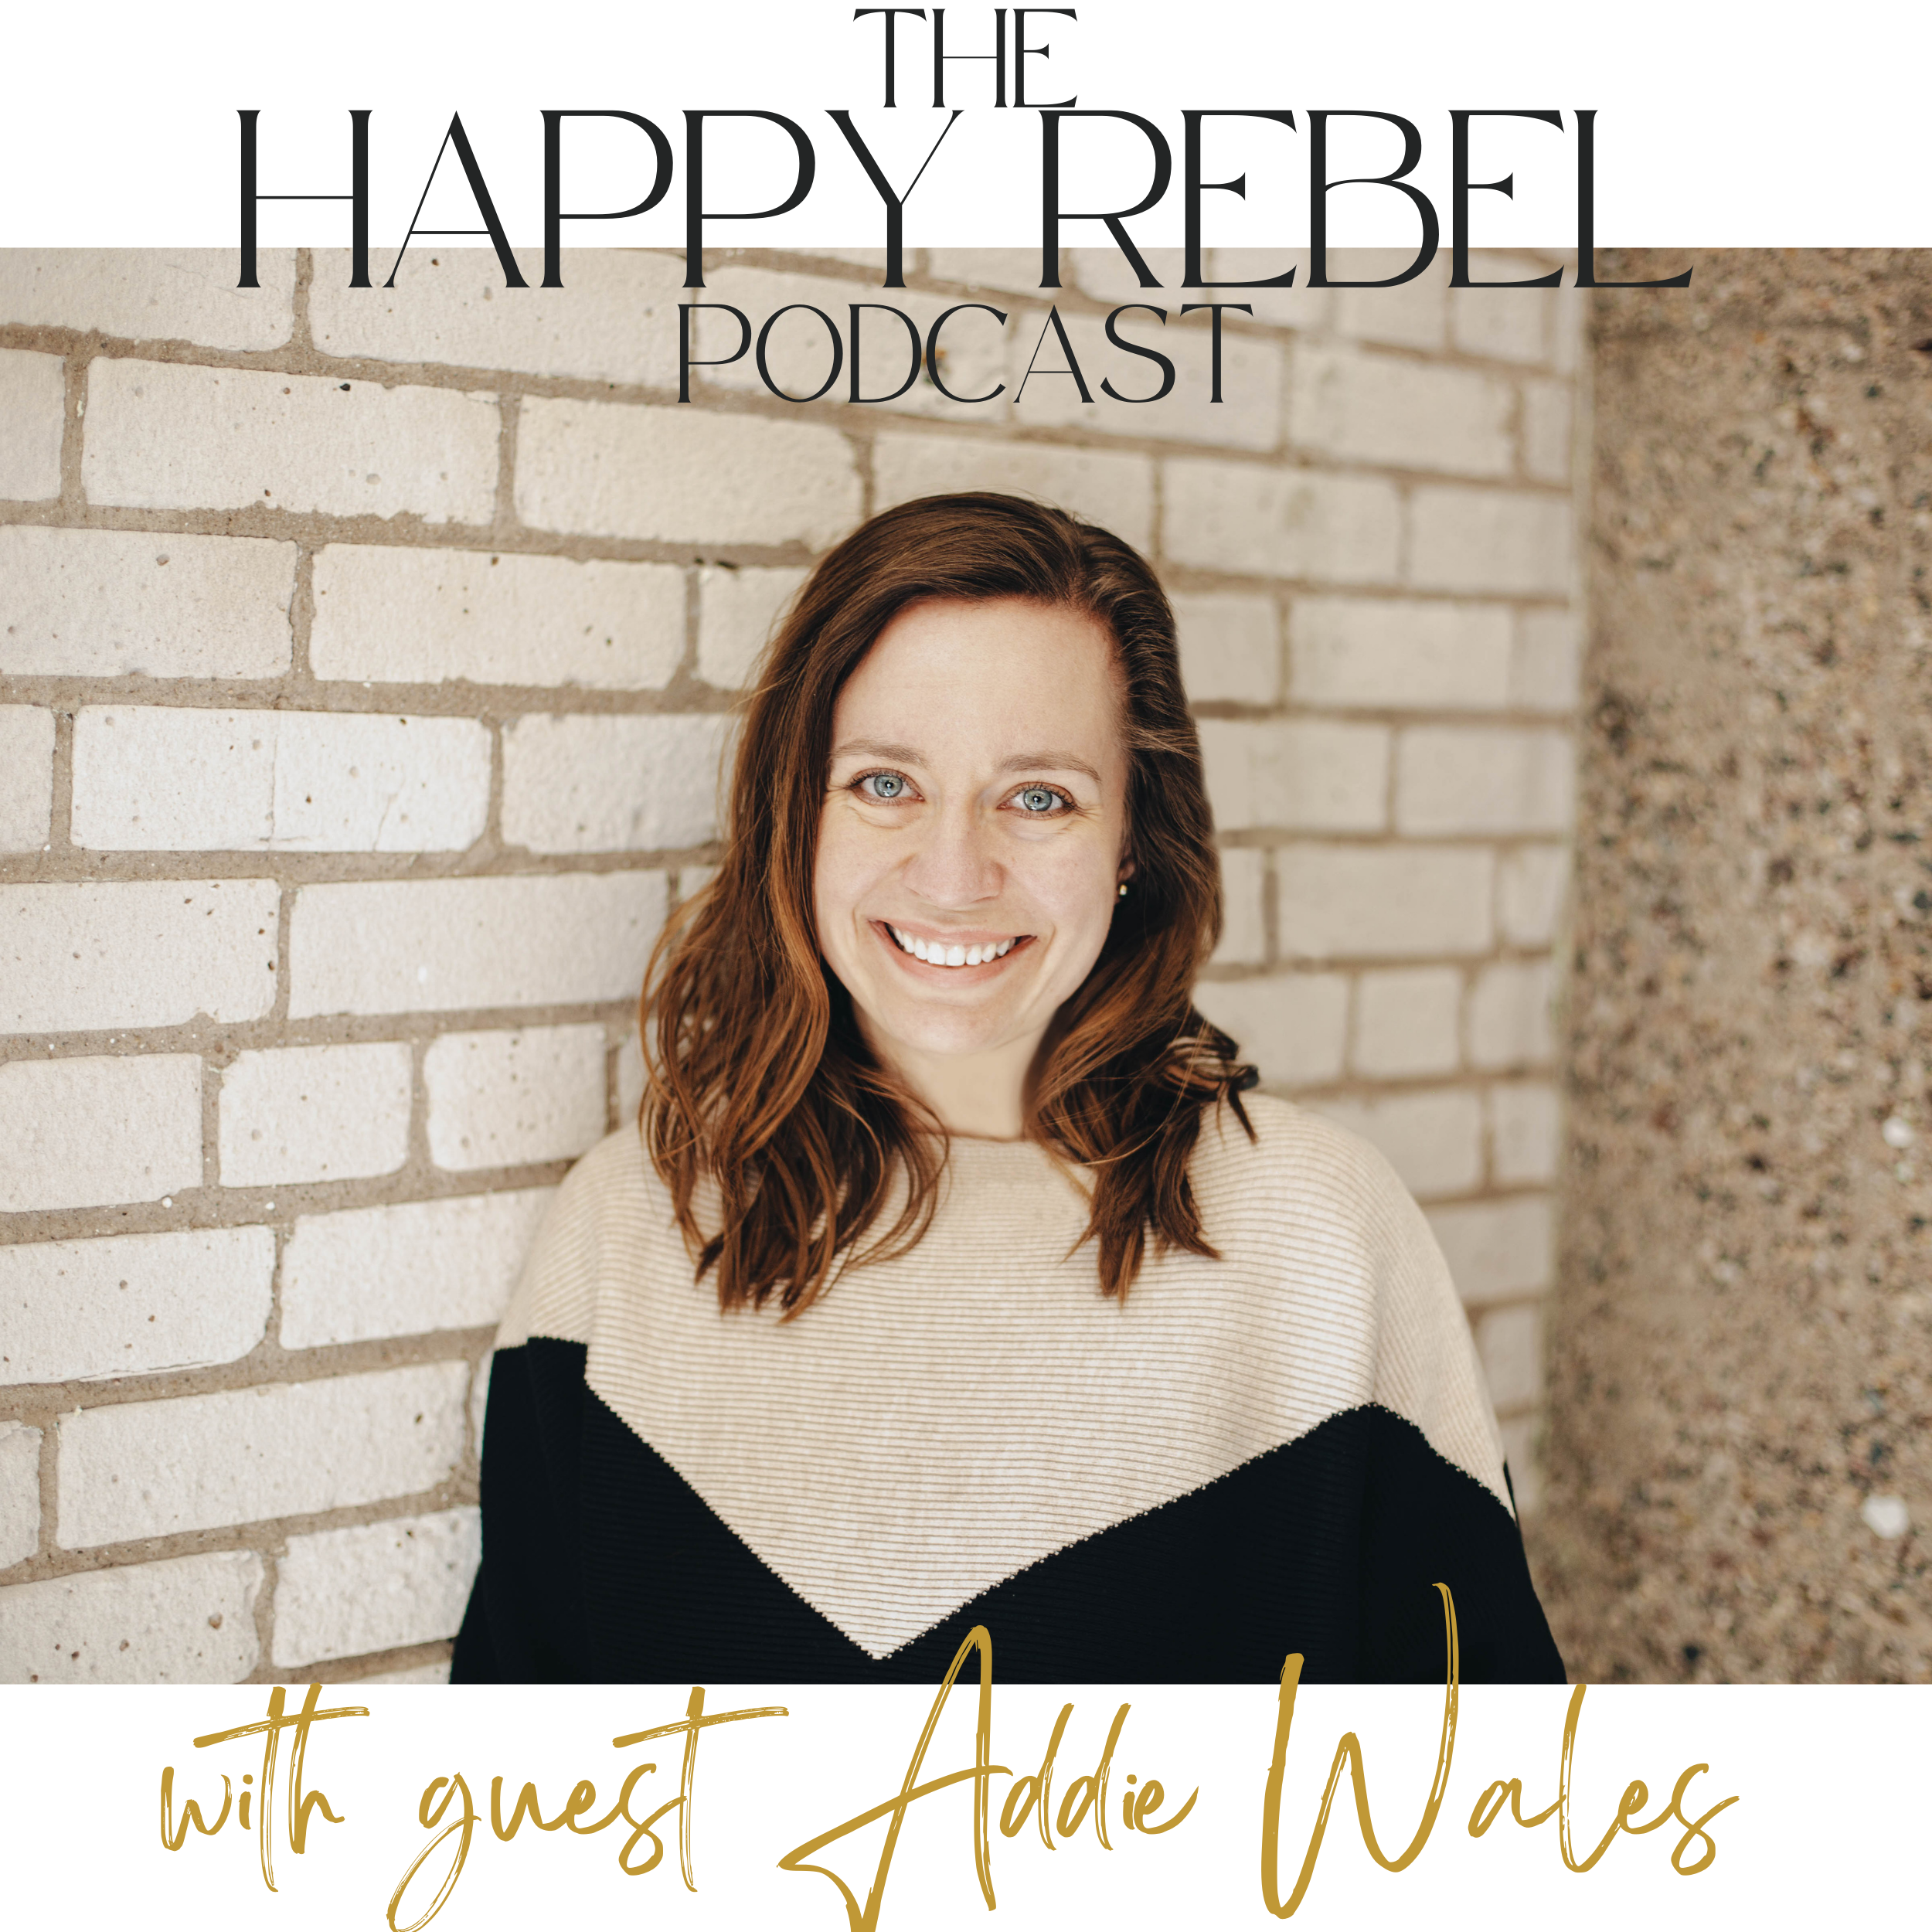 Episode 5: Addie Wales on creating spaces and movement as medicine.